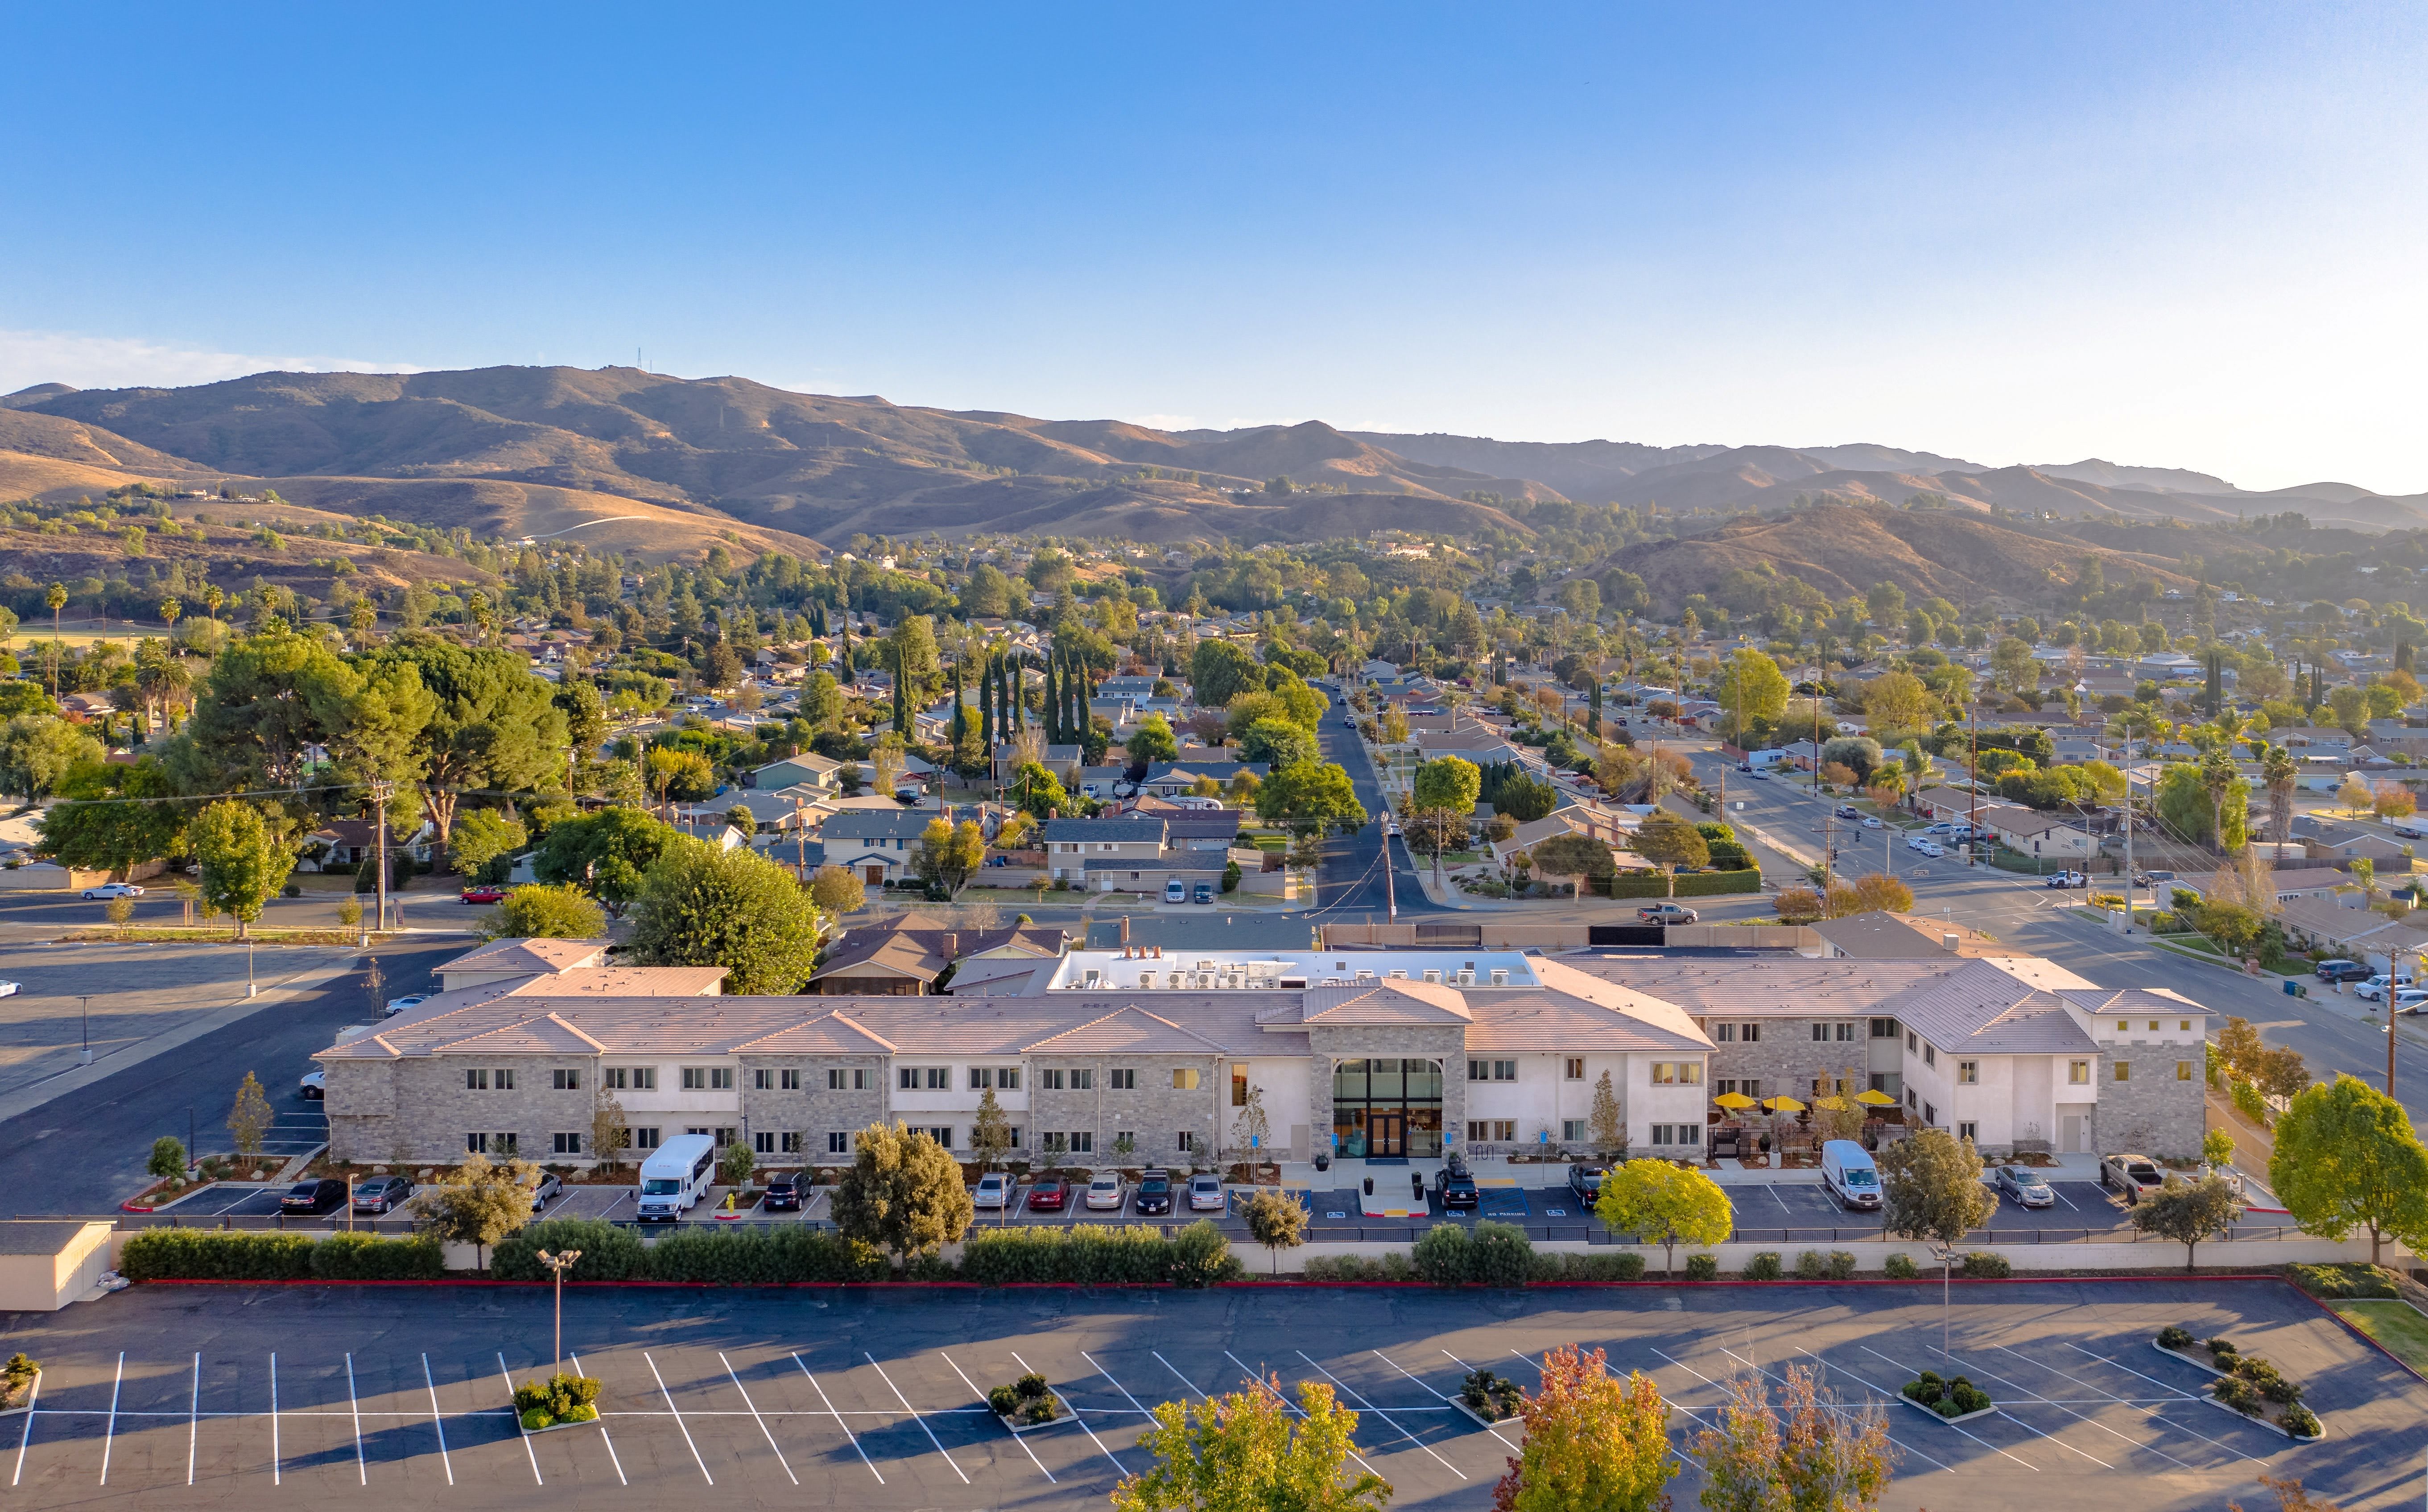 Vista at Simi Valley aerial view of community